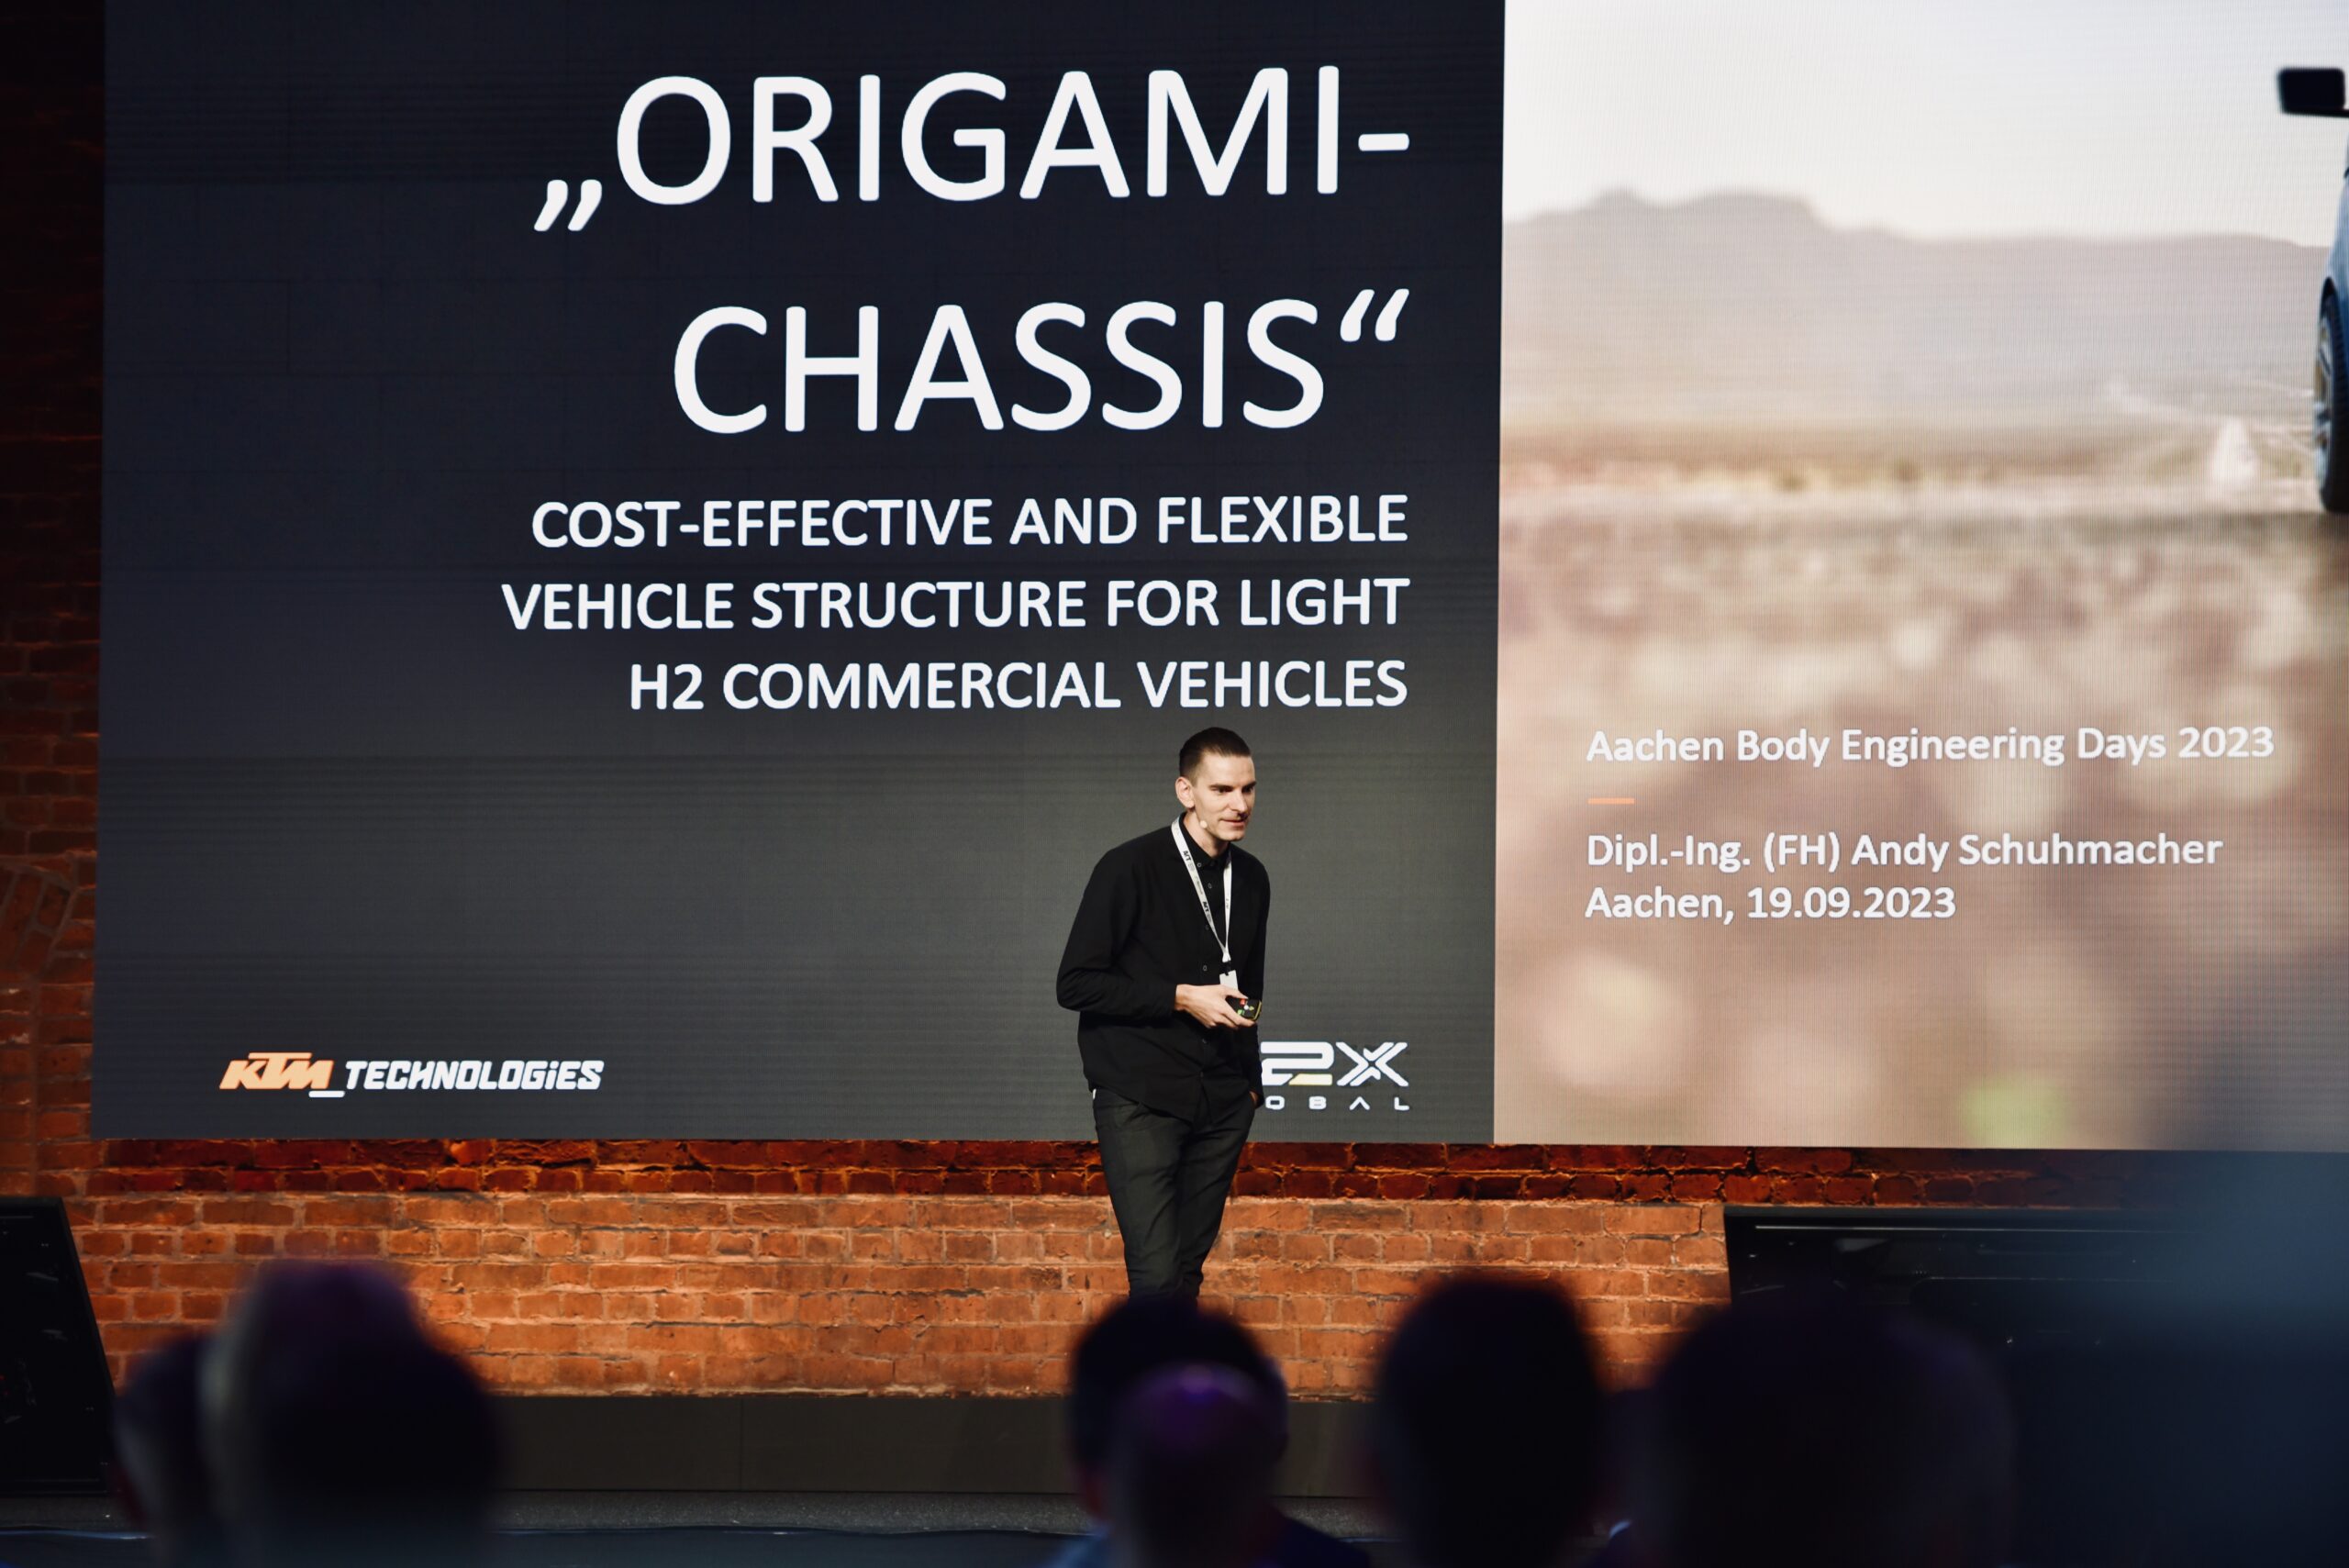 Man doing a presentation on stage. Large screen behind saying Origami Chassis.